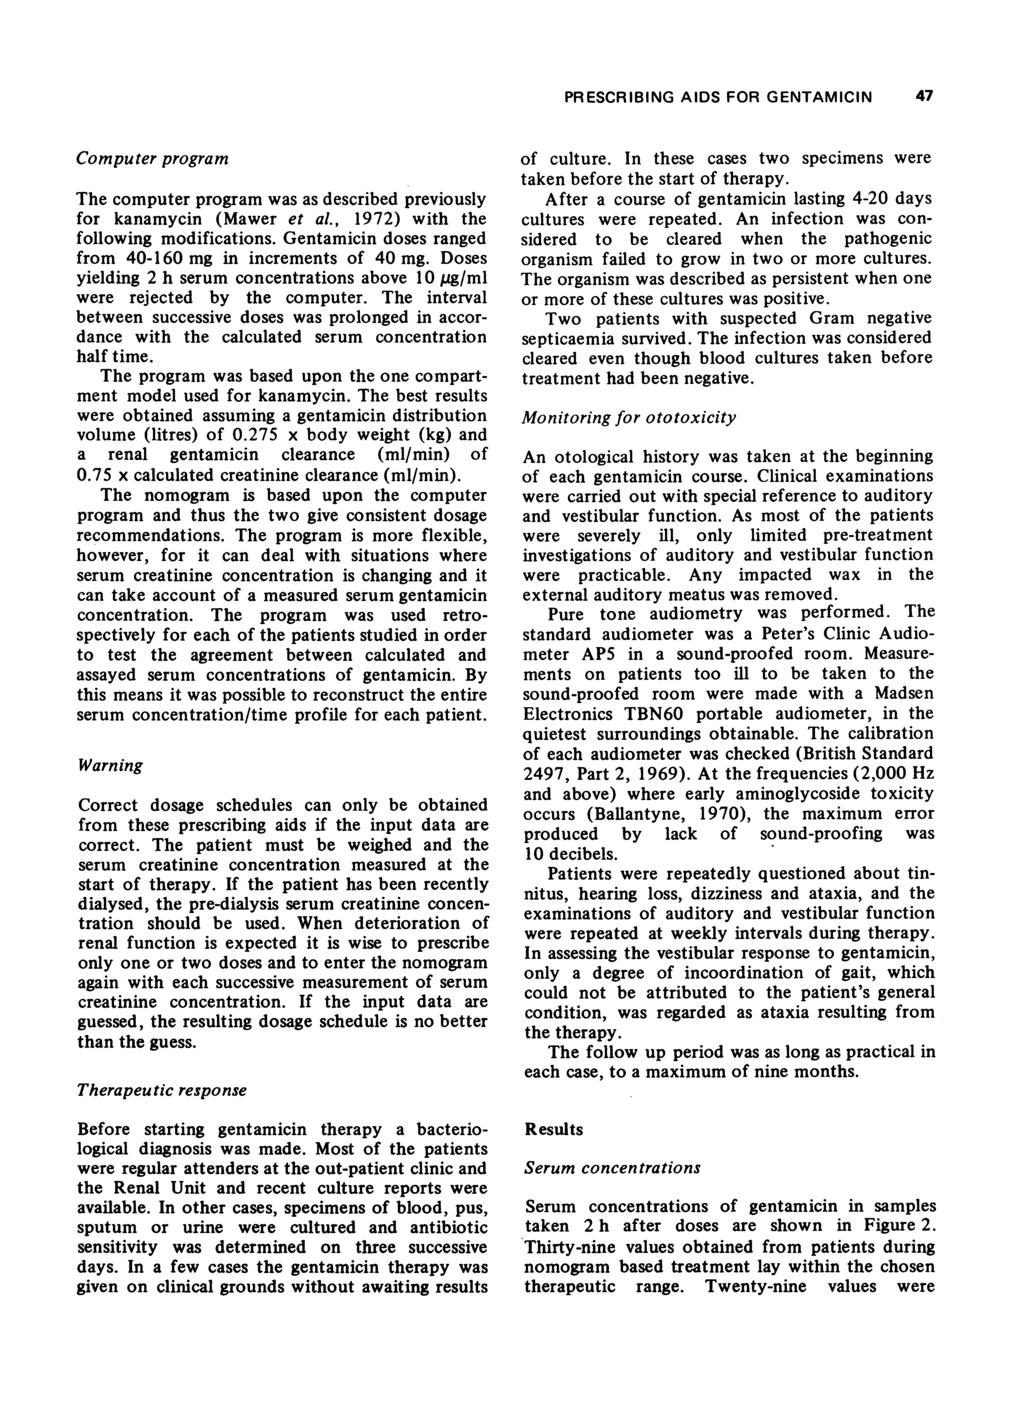 PRSCRIBING AIDS FOR GNTAMICIN 7 Computer program The computer program was as described previously for kanamycin (Mawer et al., 1972) with the following modifications.